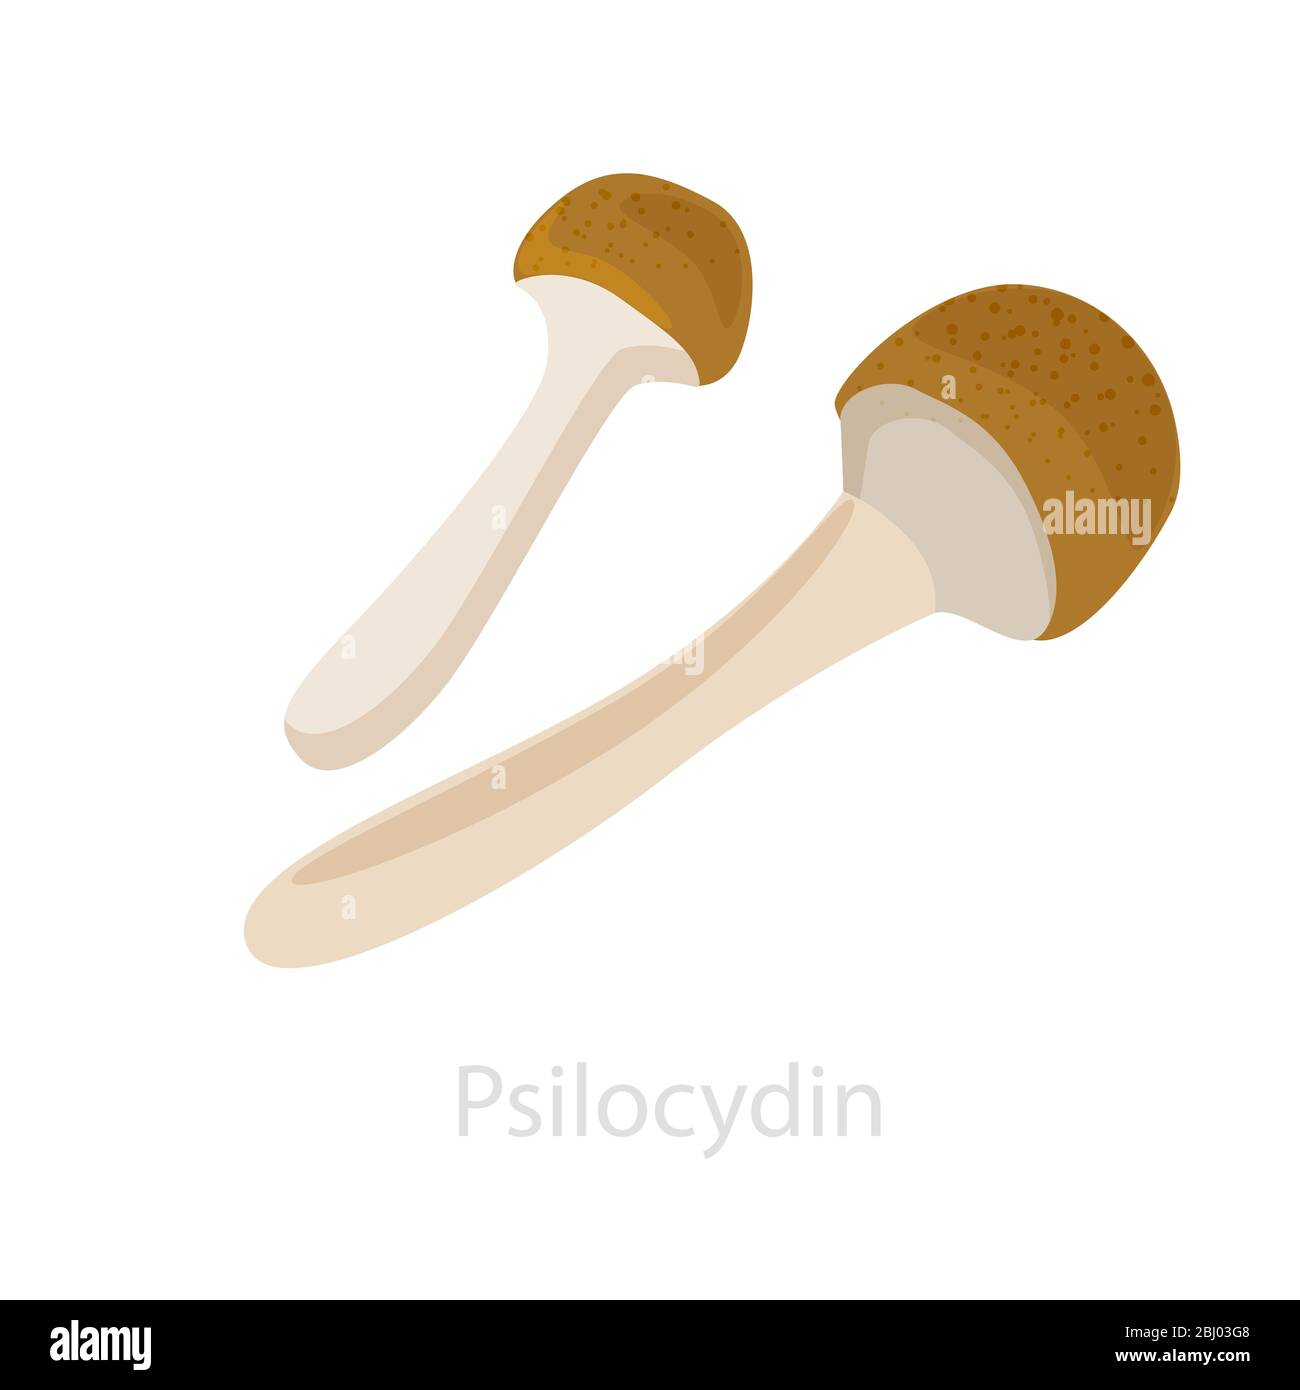 Image of psilocybin mushrooms. The concept of the psychedelic mushroom Stock Vector